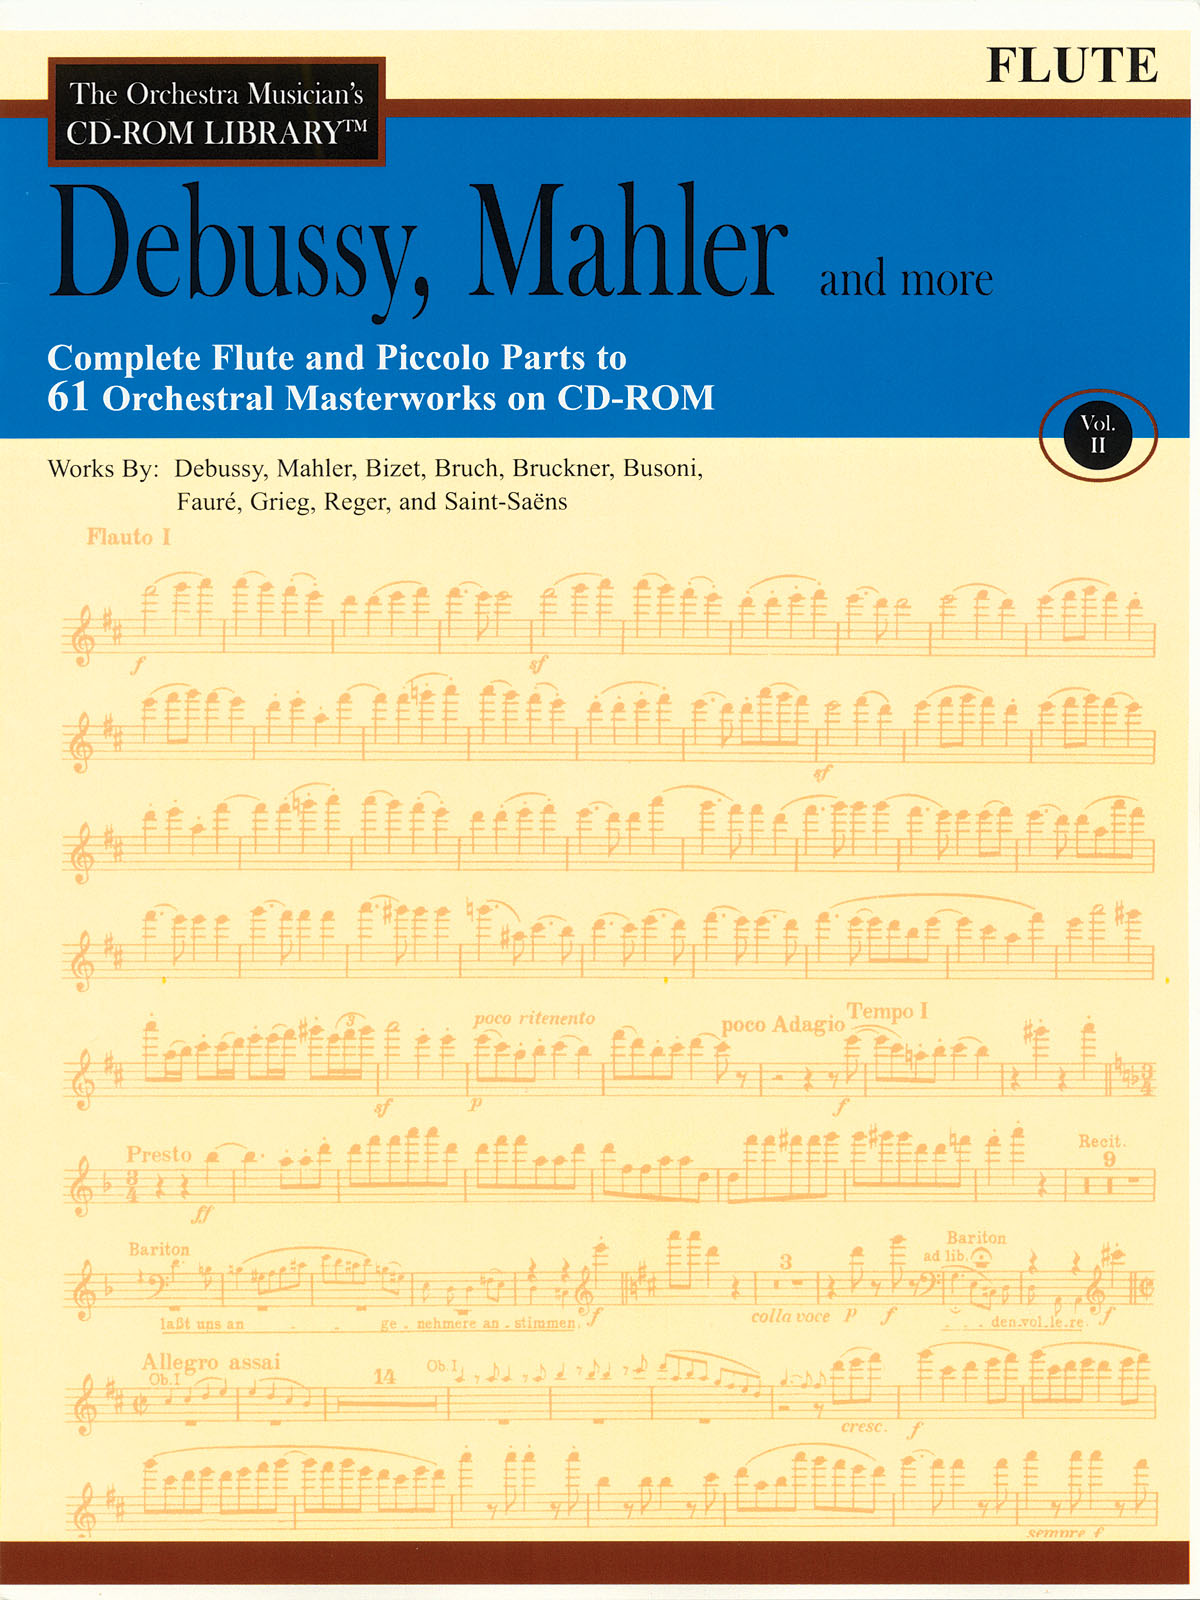 Debussy, Mahler and More – Volume 2(The Orchestra Musician’s CD-ROM Library – Flute)